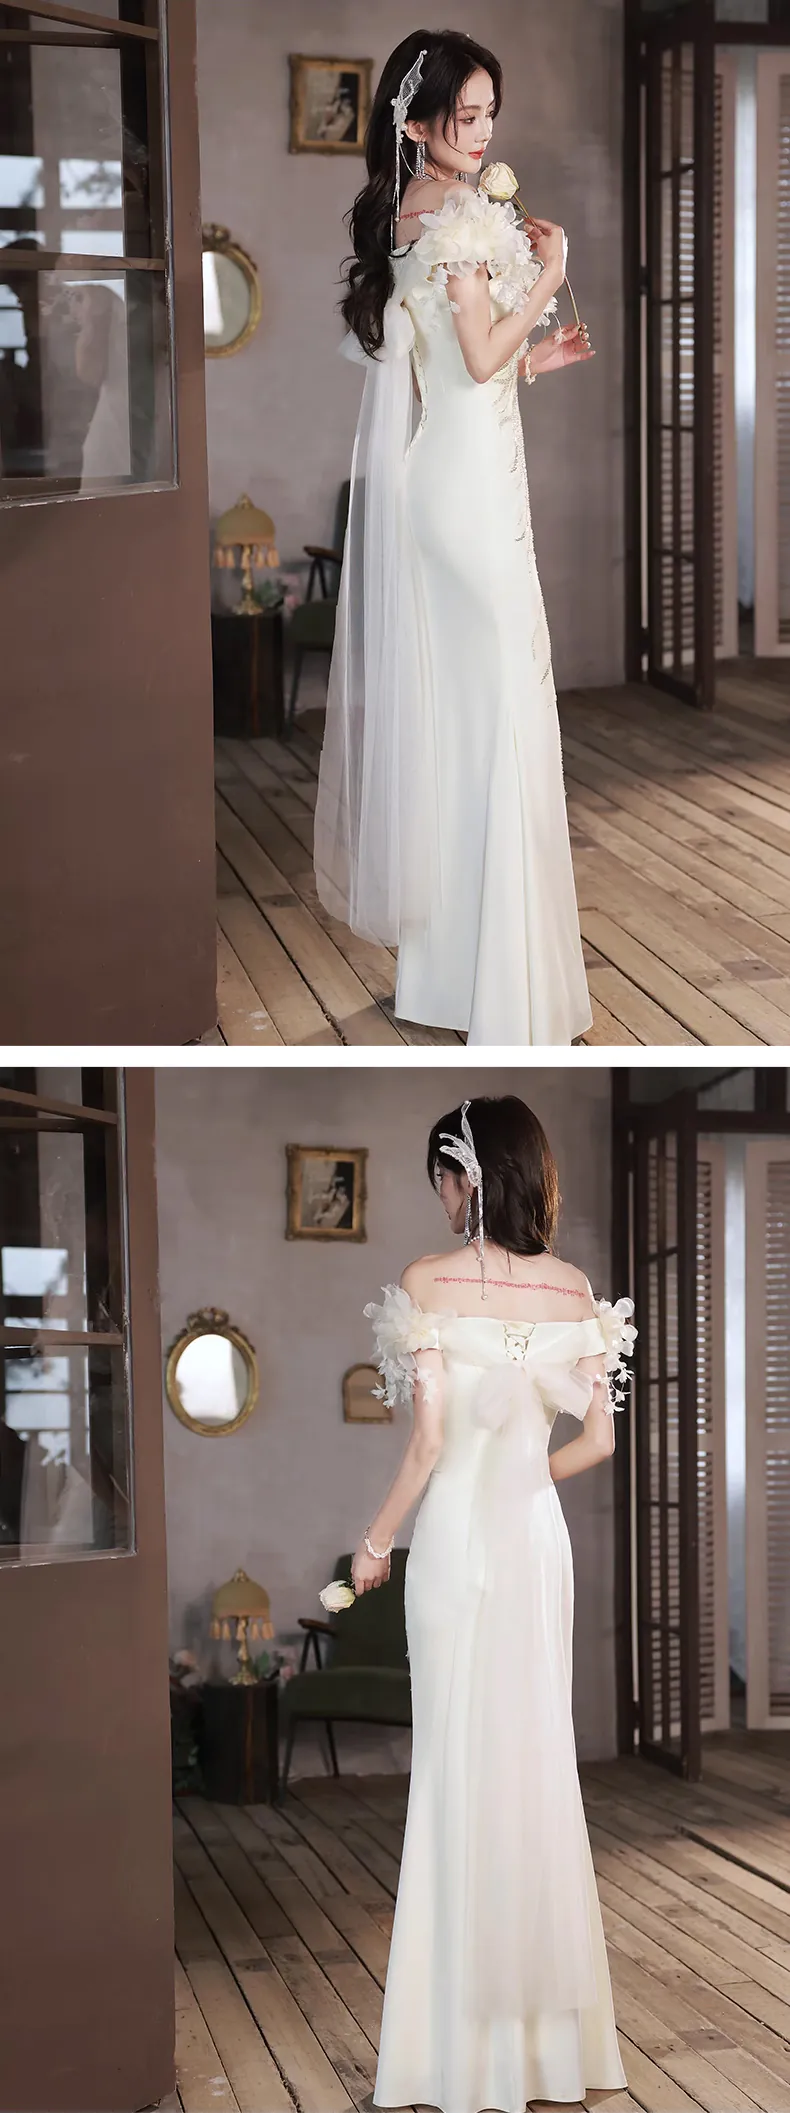 Fairy-Creamy-White-Off-the-Shoulder-Fishtail-Banquet-Prom-Party-Dress15